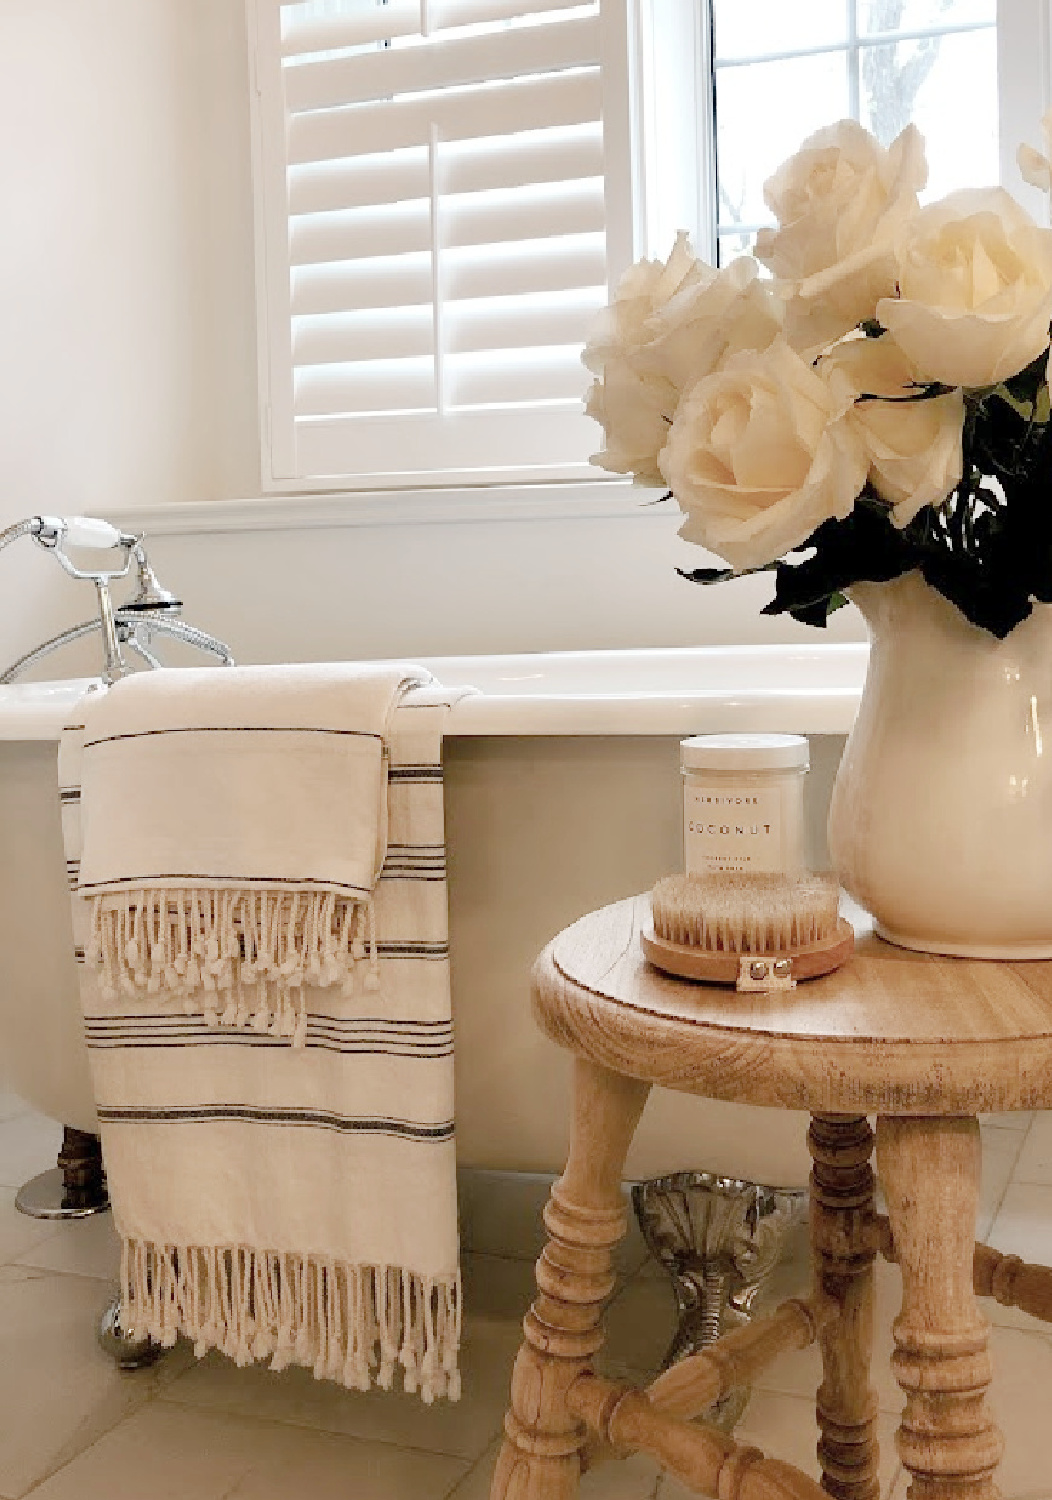 Modern French white bath with Turkish stripe towels, roses, and Herbivore coconut bath soak - Hello Lovely Studio.